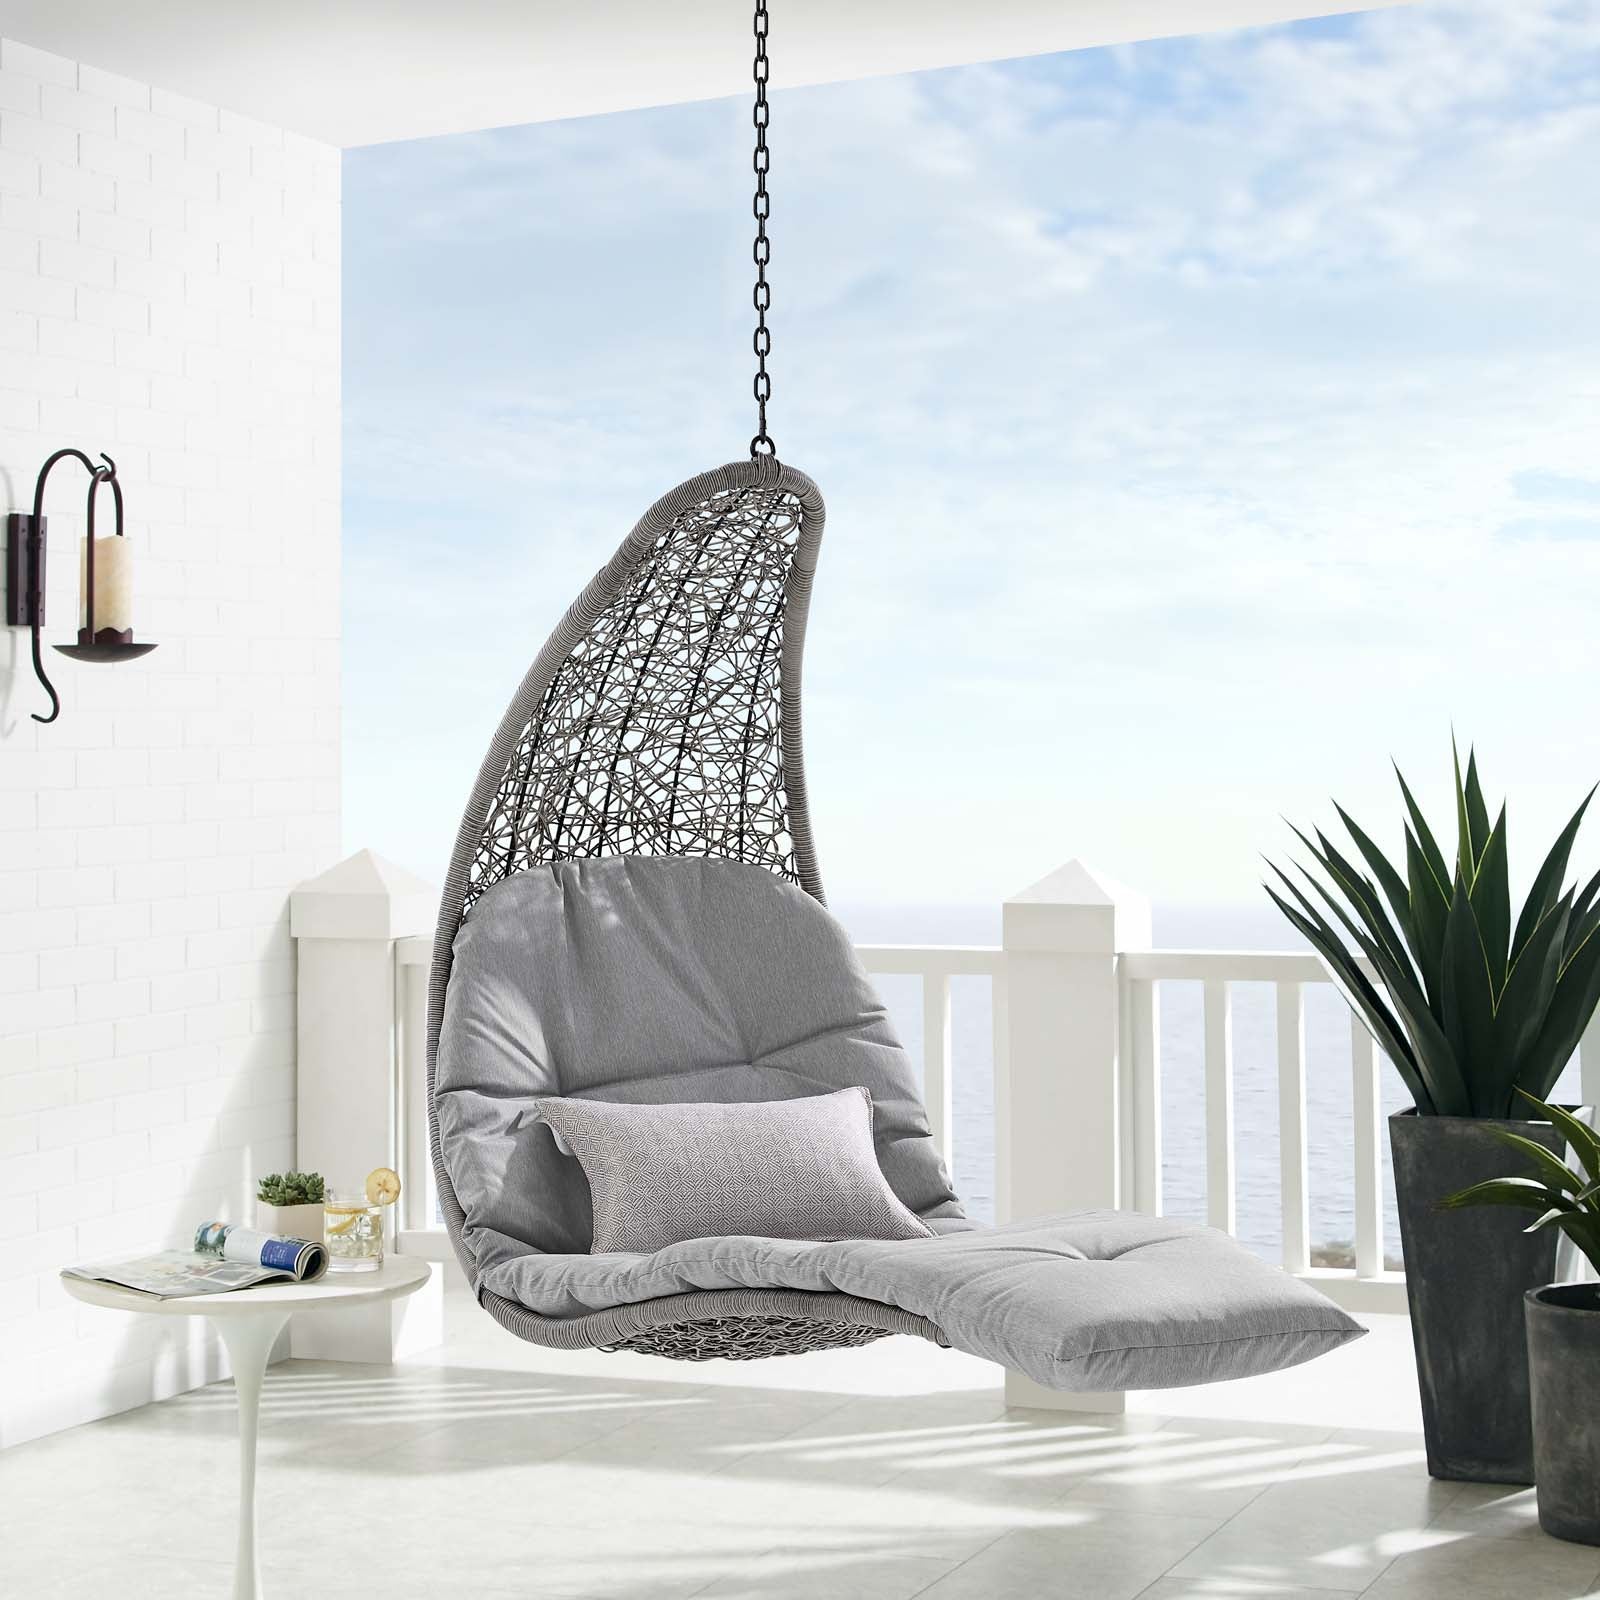 Landscape Hanging Chaise Lounge Outdoor Patio Swing Chair-Outdoor Chair-Modway-Wall2Wall Furnishings